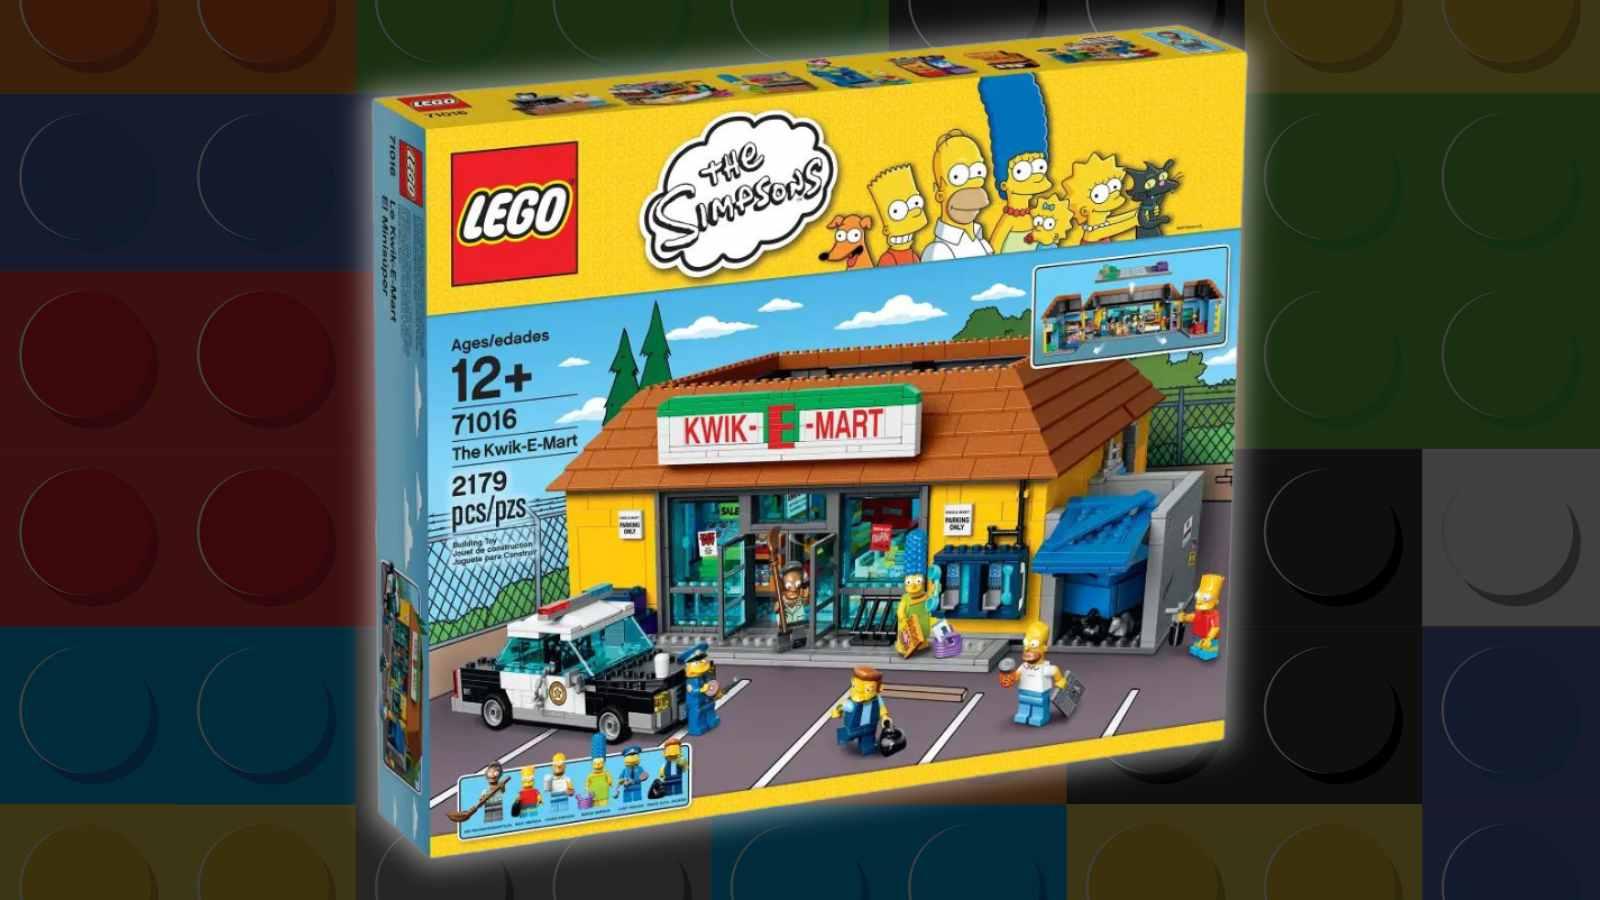 The LEGO The Simpsons Kwik-E-Mart on a LEGO background